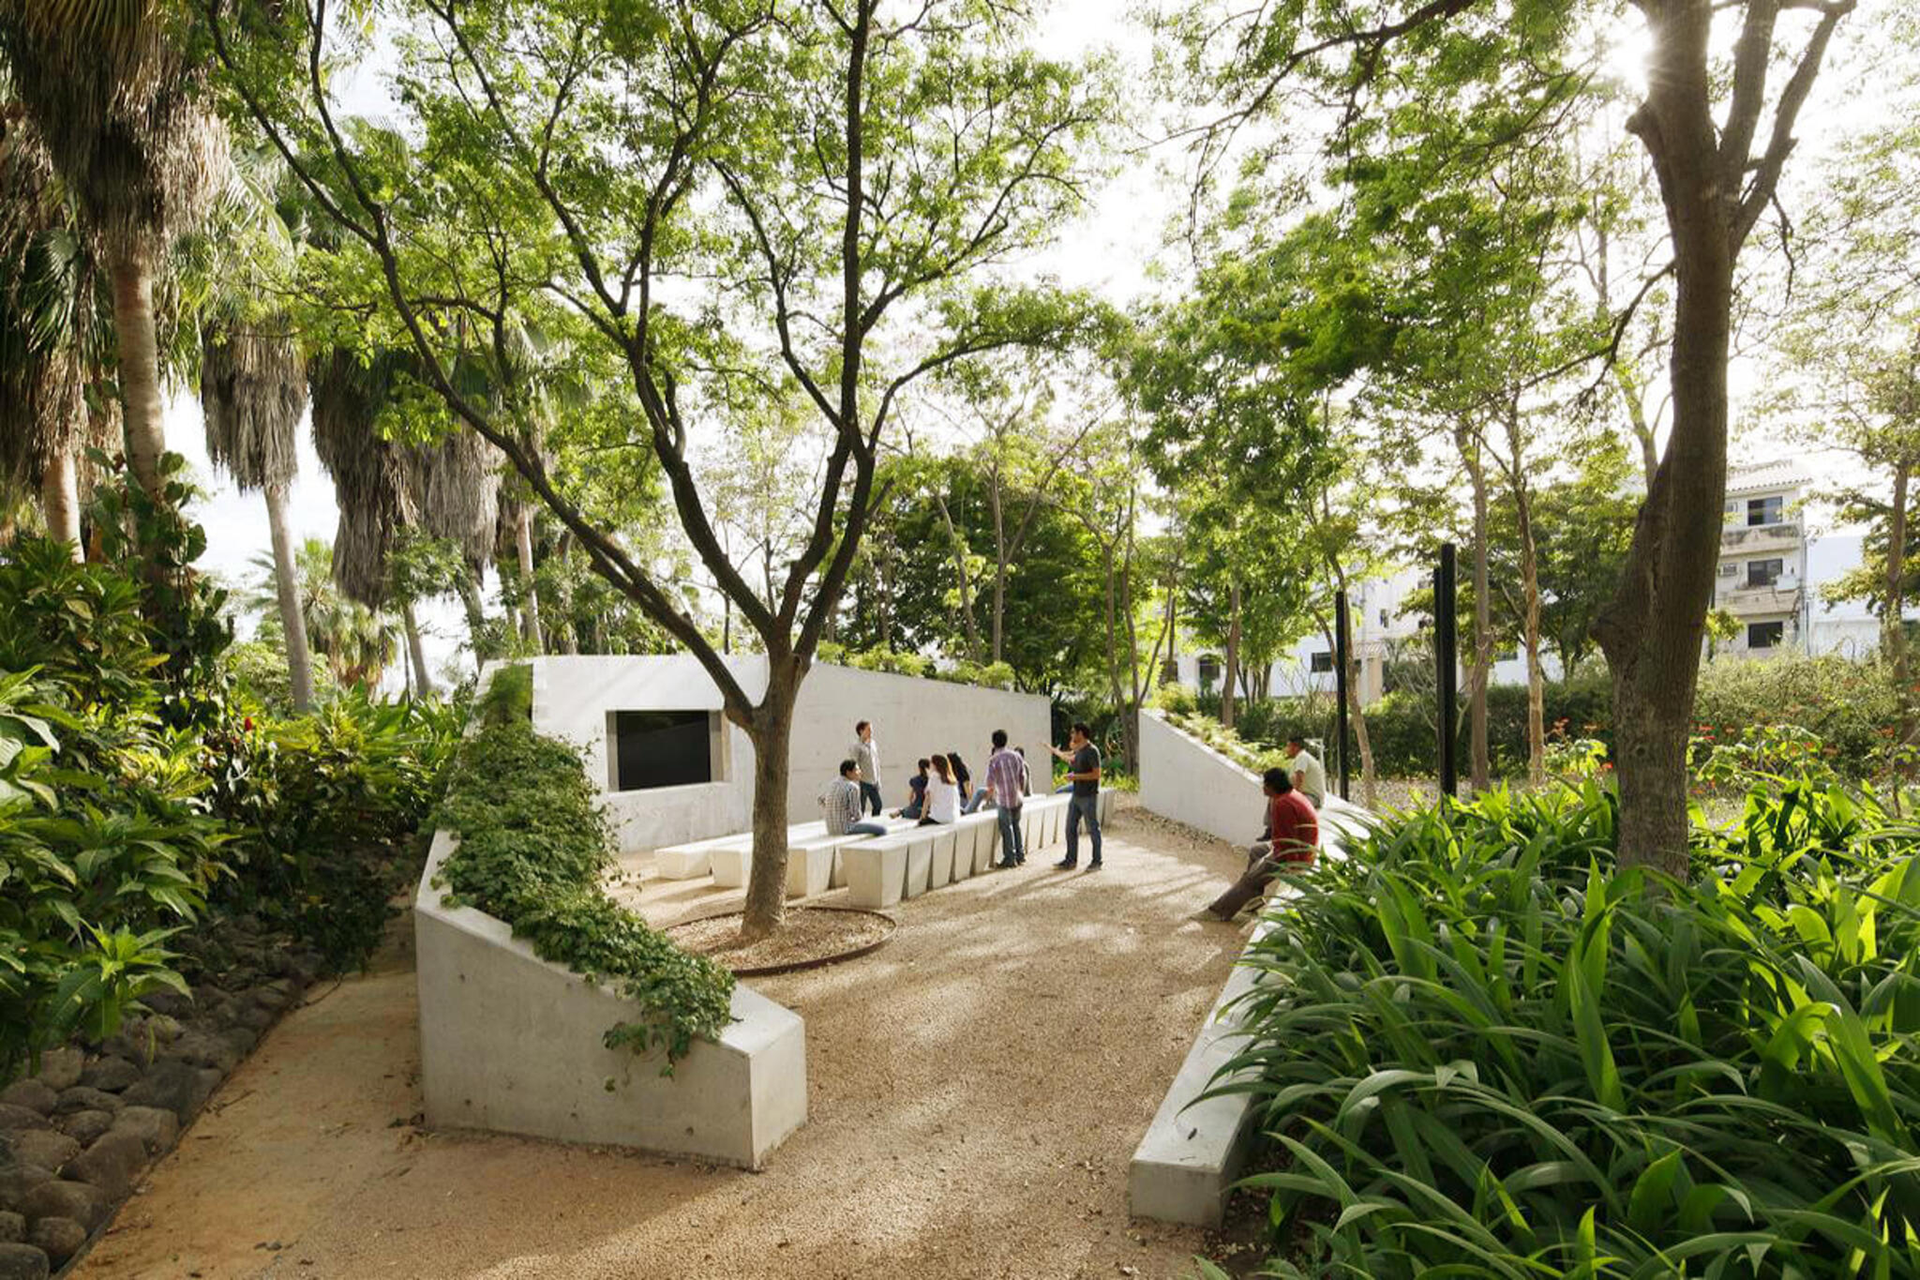 Area of white concrete seating tucked into a densely green area of a park